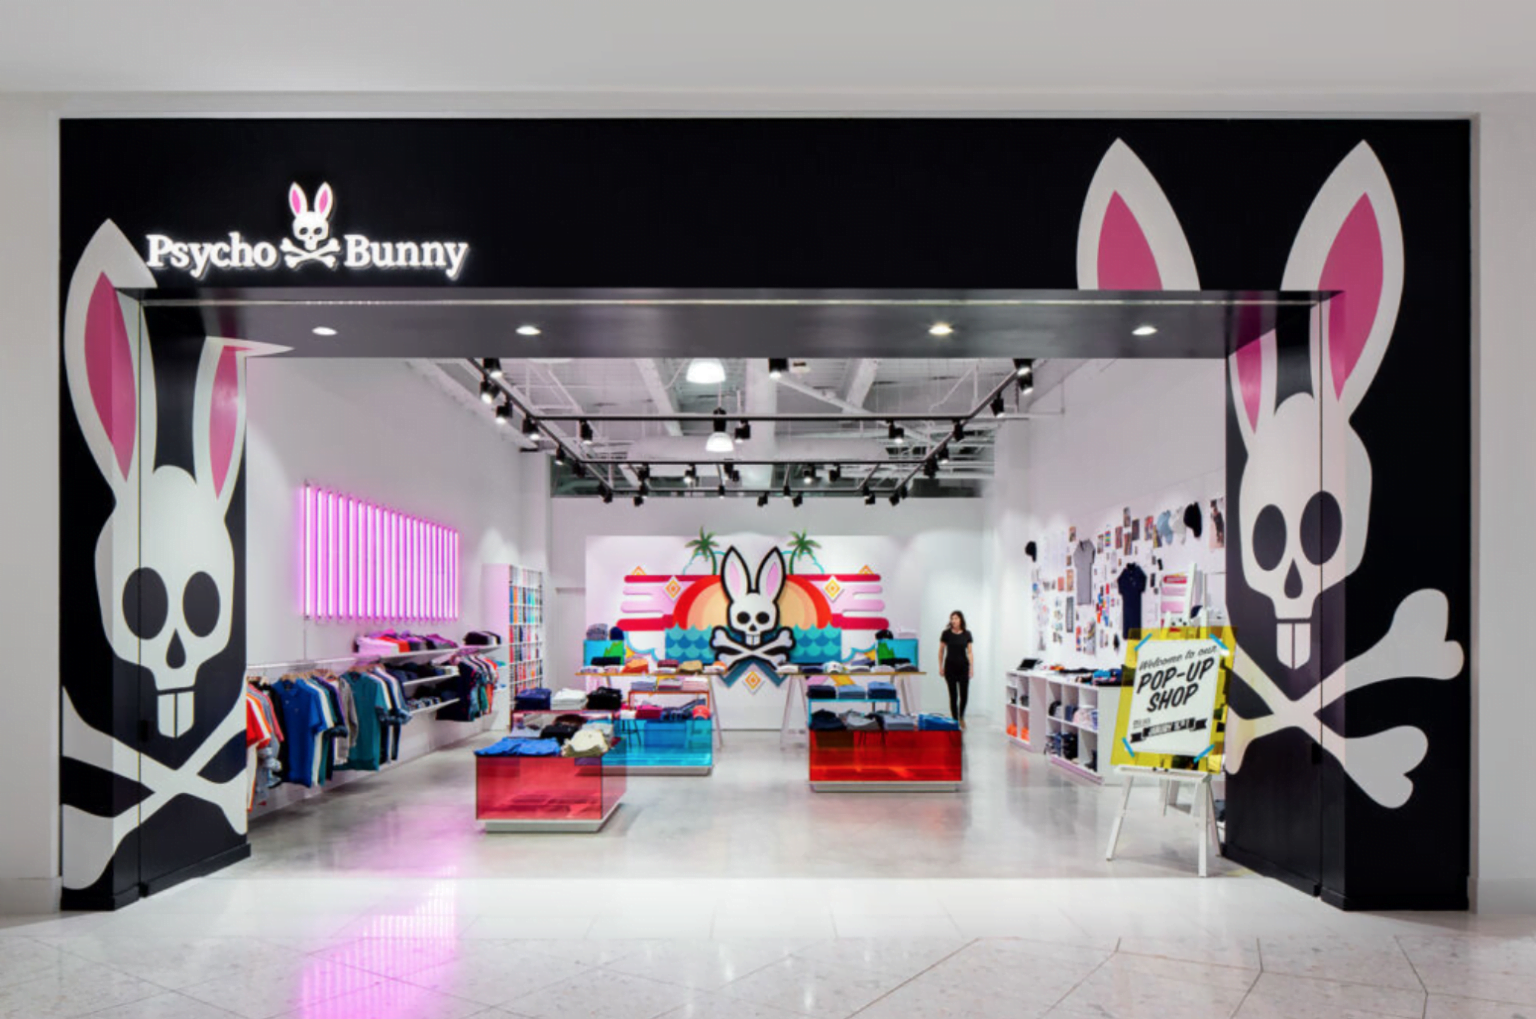 Edgy Men's Fashion Brand 'Psycho Bunny' to Open Canadian Stores